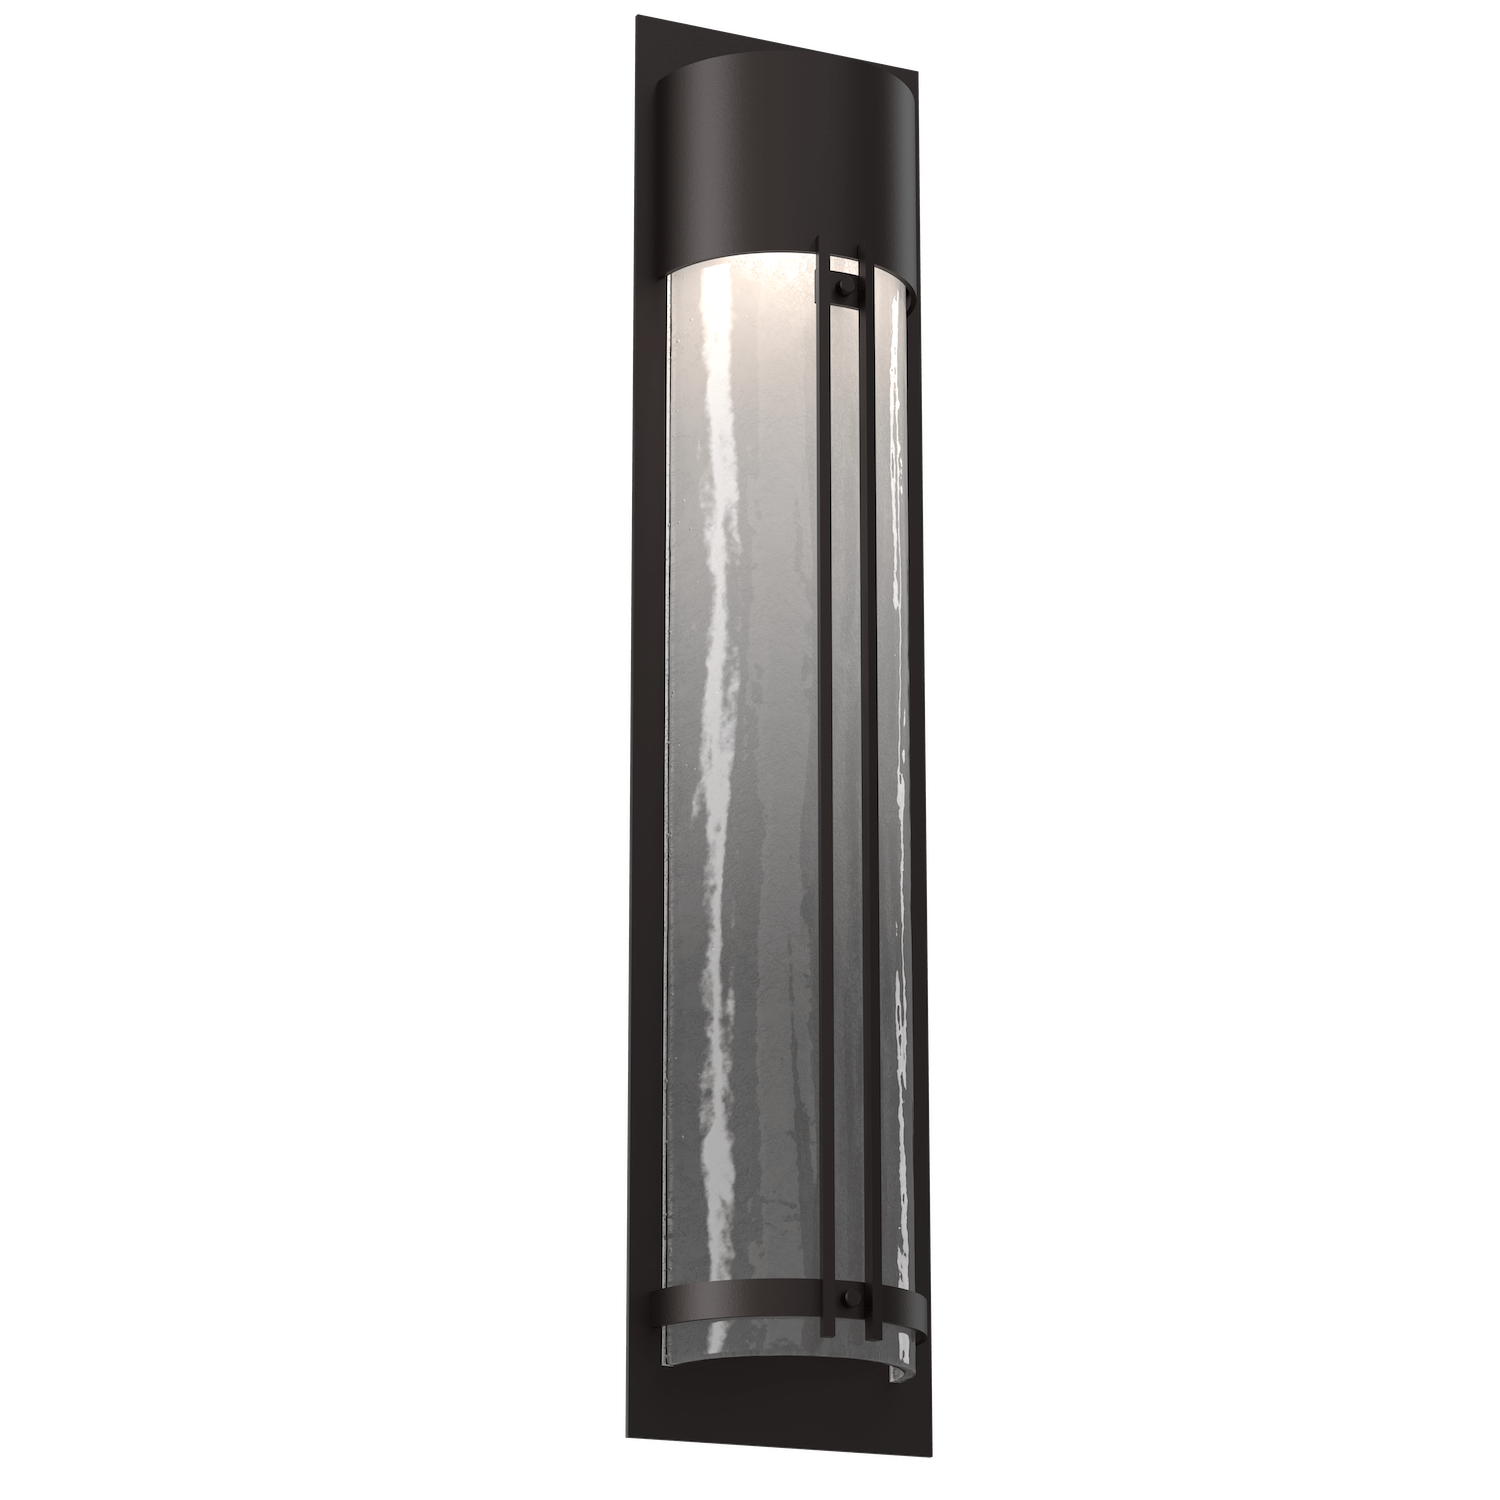 ODB0054-31-SB-FG-Hammerton-Studio-31-inch-outdoor-sconce-with-half-round-frosted-granite-glass-cover-with-statuary-bronze-finish-and-LED-lamping